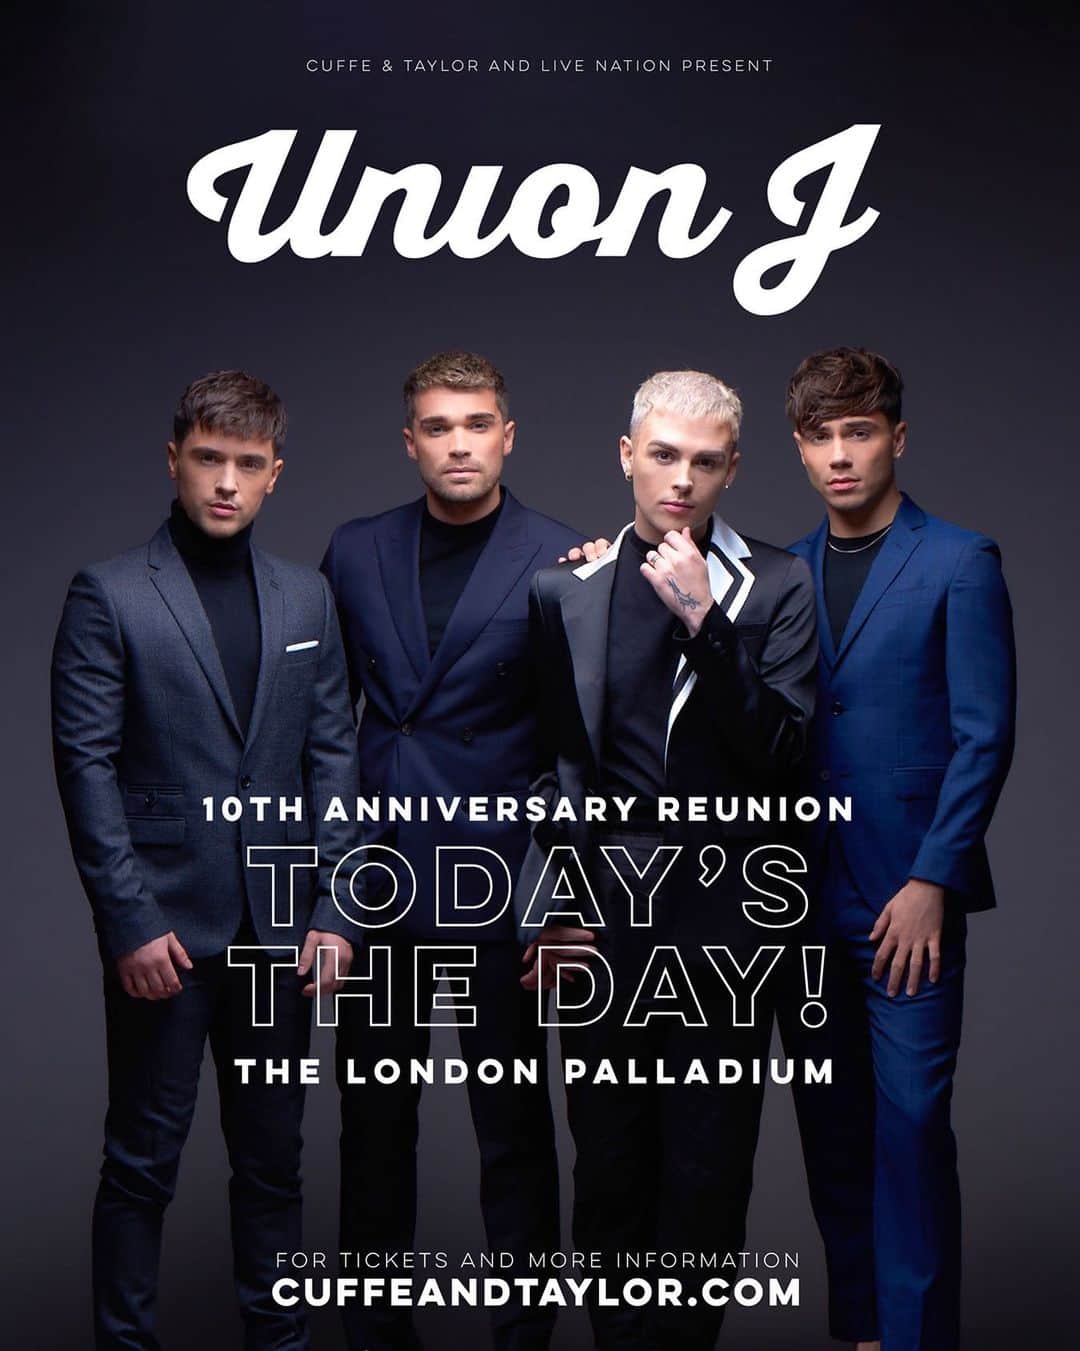 Union Jのインスタグラム：「IT'S FINALLY HERE! We can't even put into words how excited we are to see you all! Who's joining us tonight at @thelondonpalladium ??  Last few tickets available from the venue if you haven't got yours yet 🎟 bit.ly/3tpL6I7」